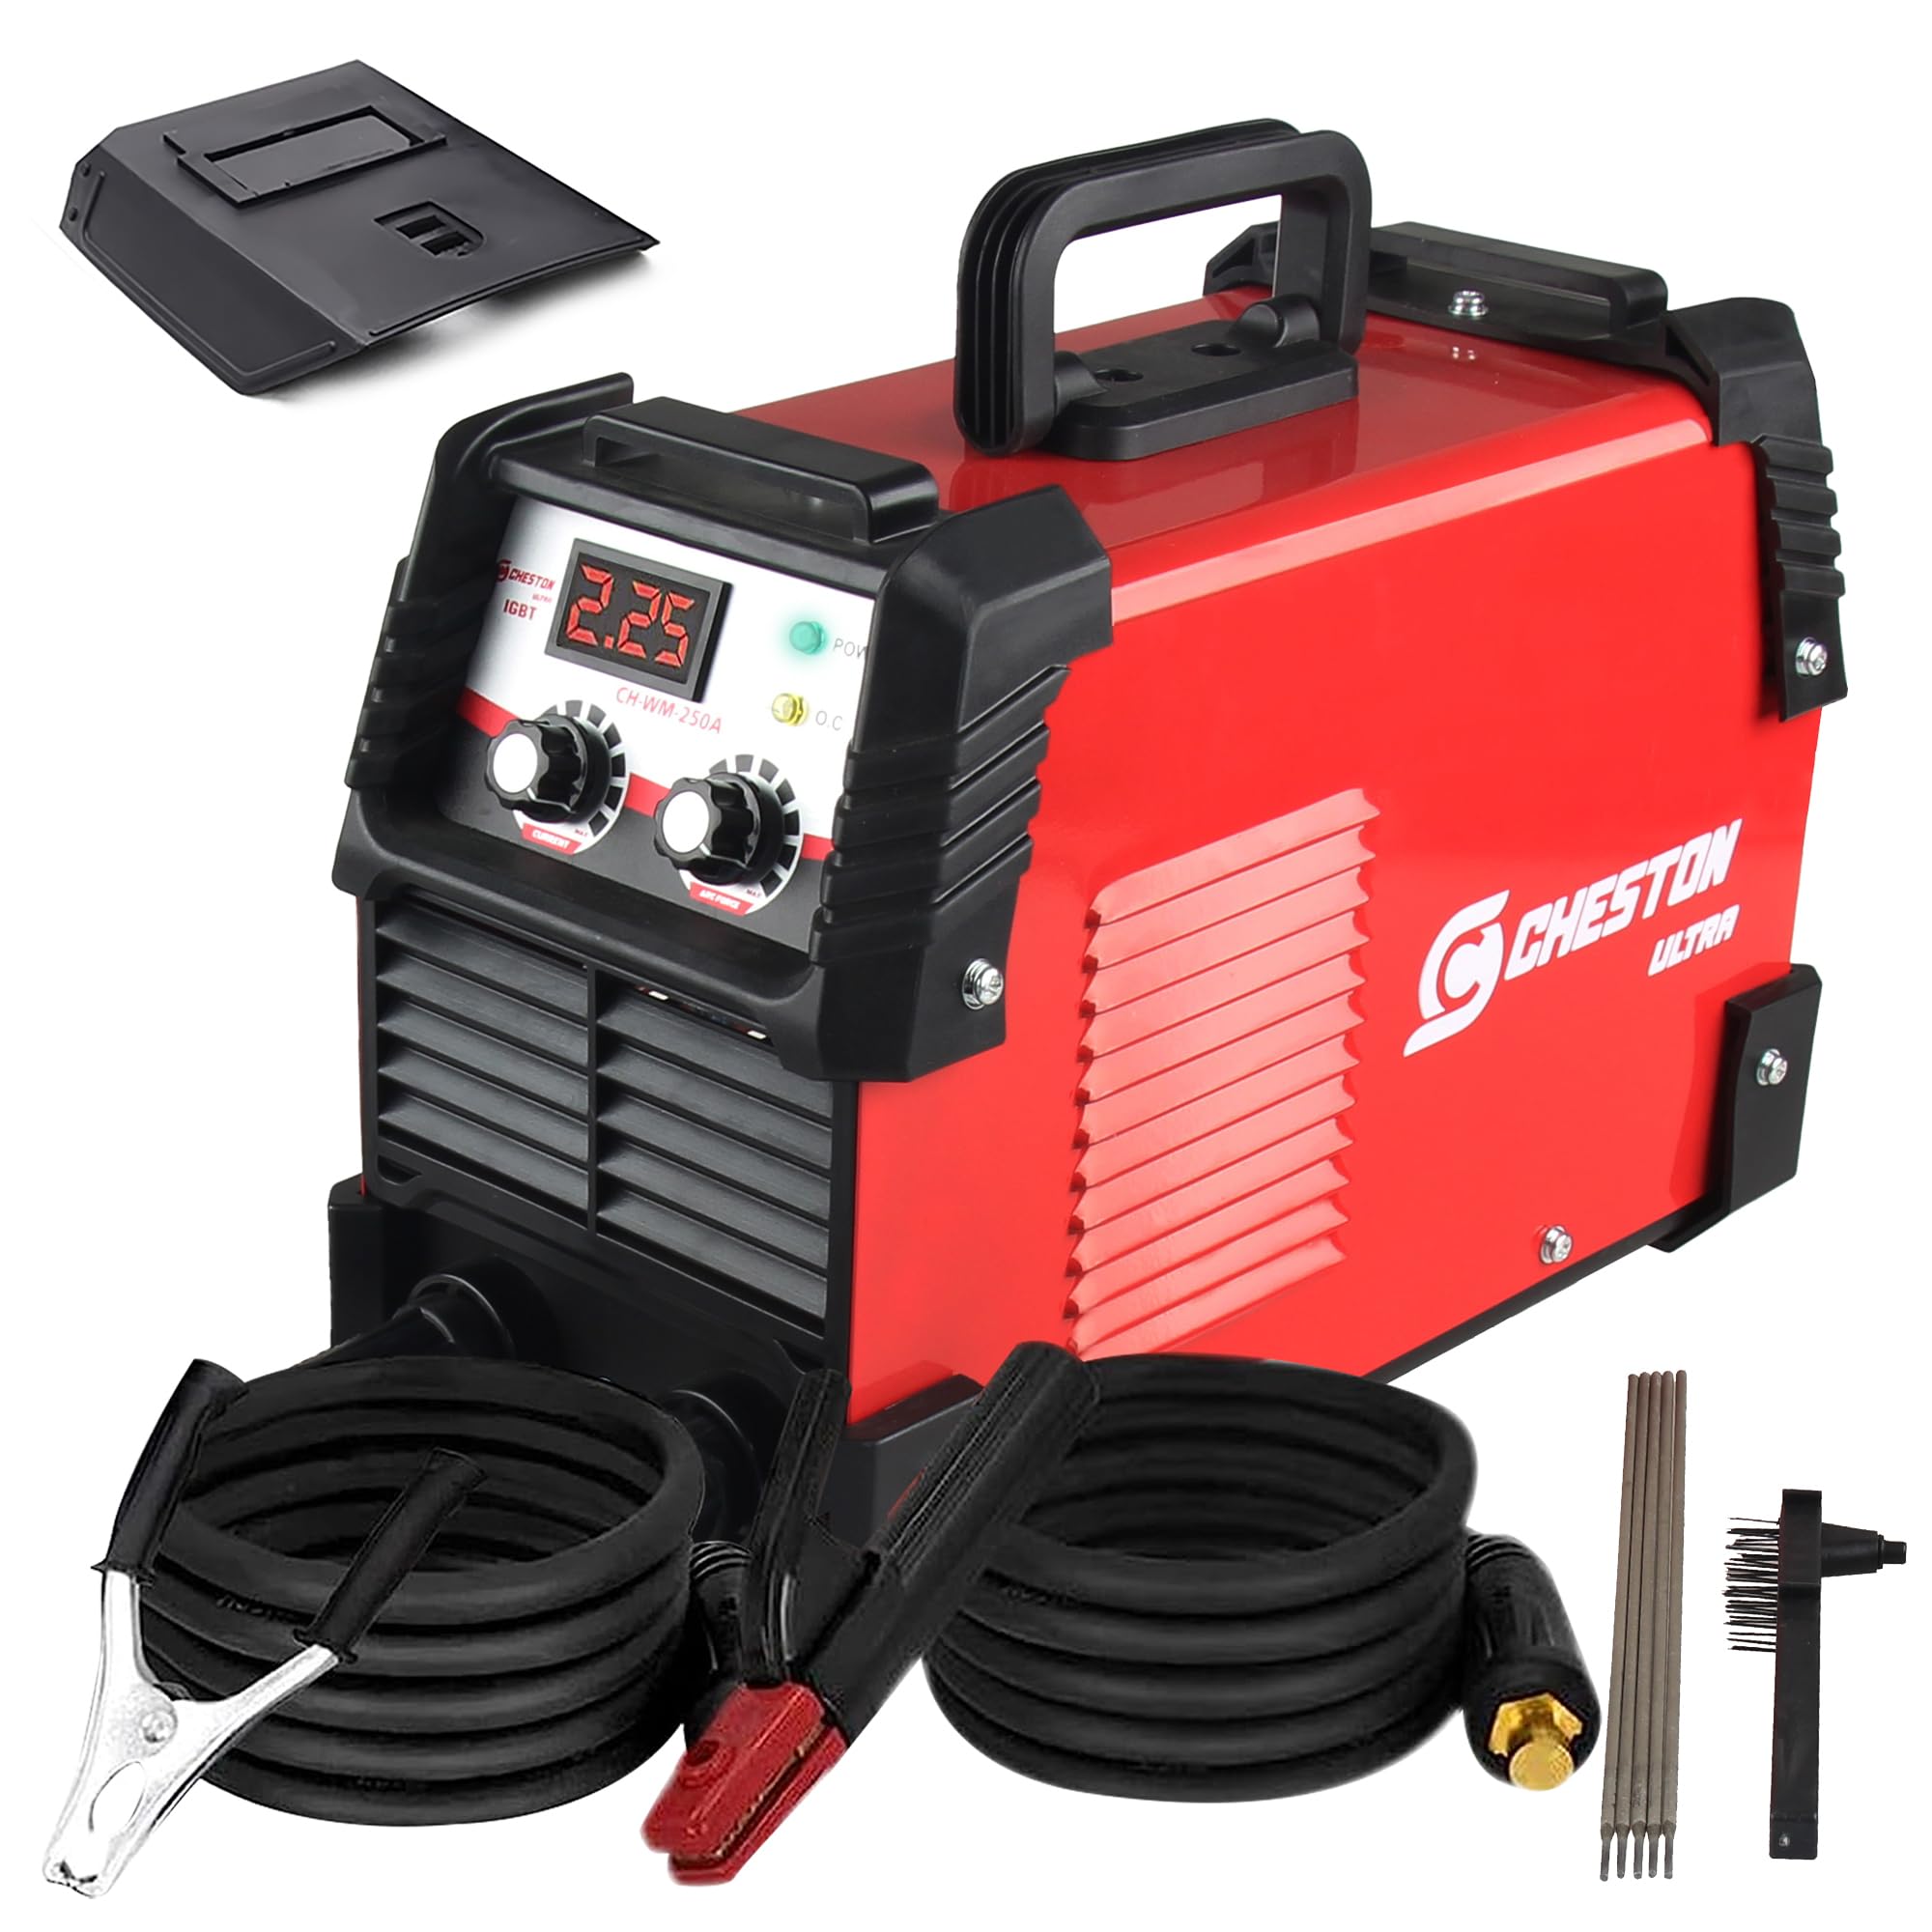 Cheston Ultra 250A Inverter Arc Welding Machine (MMA) LED Display Hot Start Welder Tool with Welding Mask, Welding Rods & Other Accessories for Steel, Iron, Aluminium, Copper & all other Metals